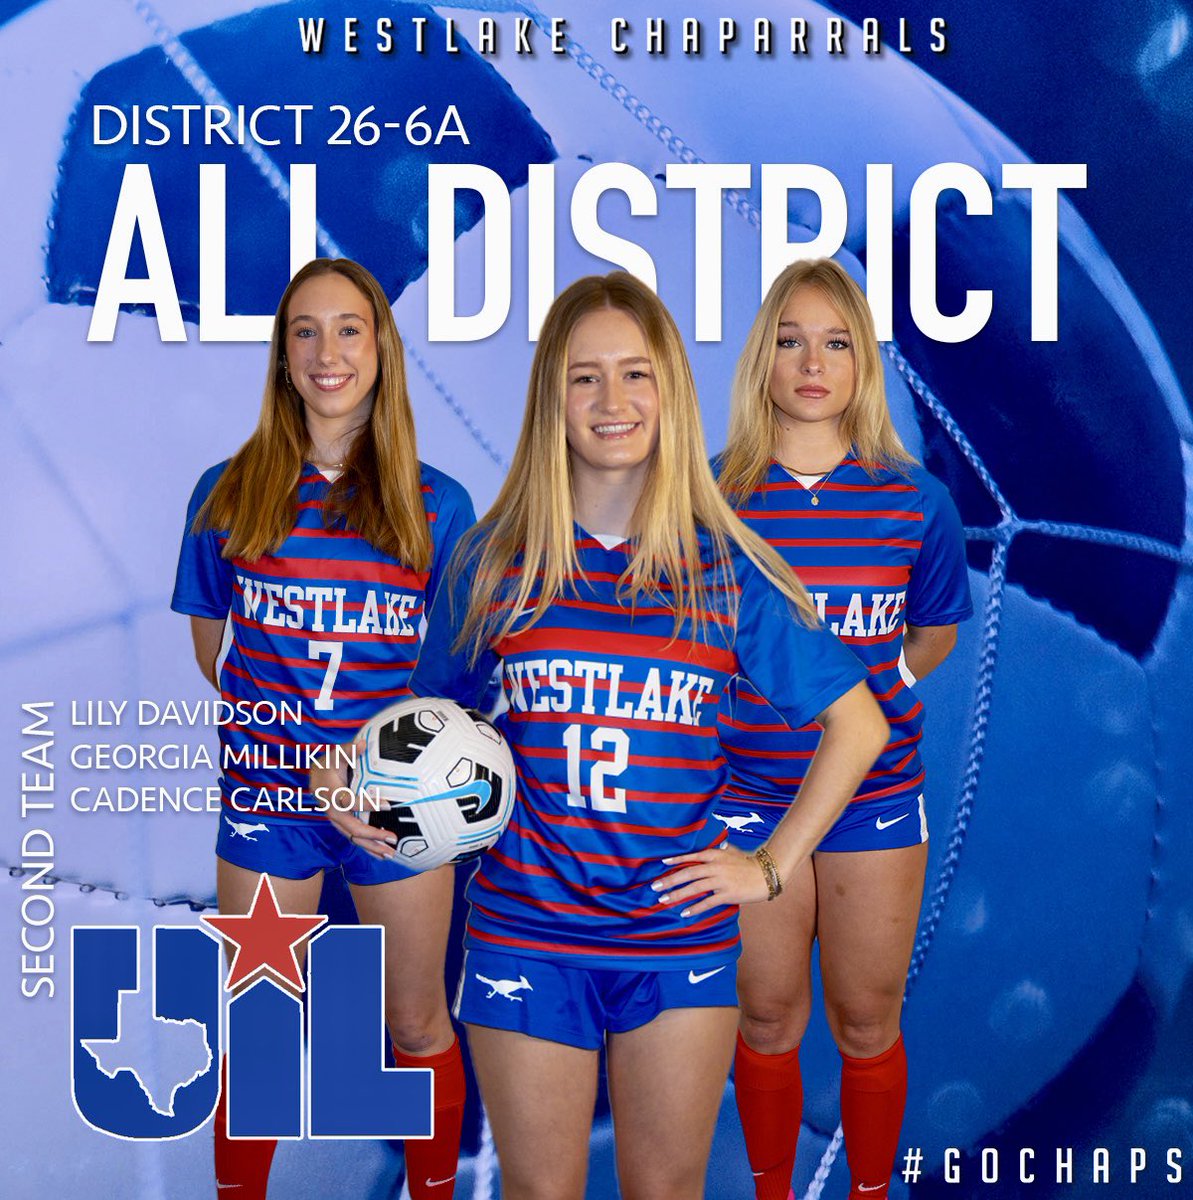 Congratulations to the three Chaps named to the 26-6A All-District 2nd Team. Shoutout to Lily Davidson, Georgia Millikin and Cadence Carlson. #GoChaps 26-6A All-District 2nd Team Lily Davidson Georgia Millikin Cadence Carlson